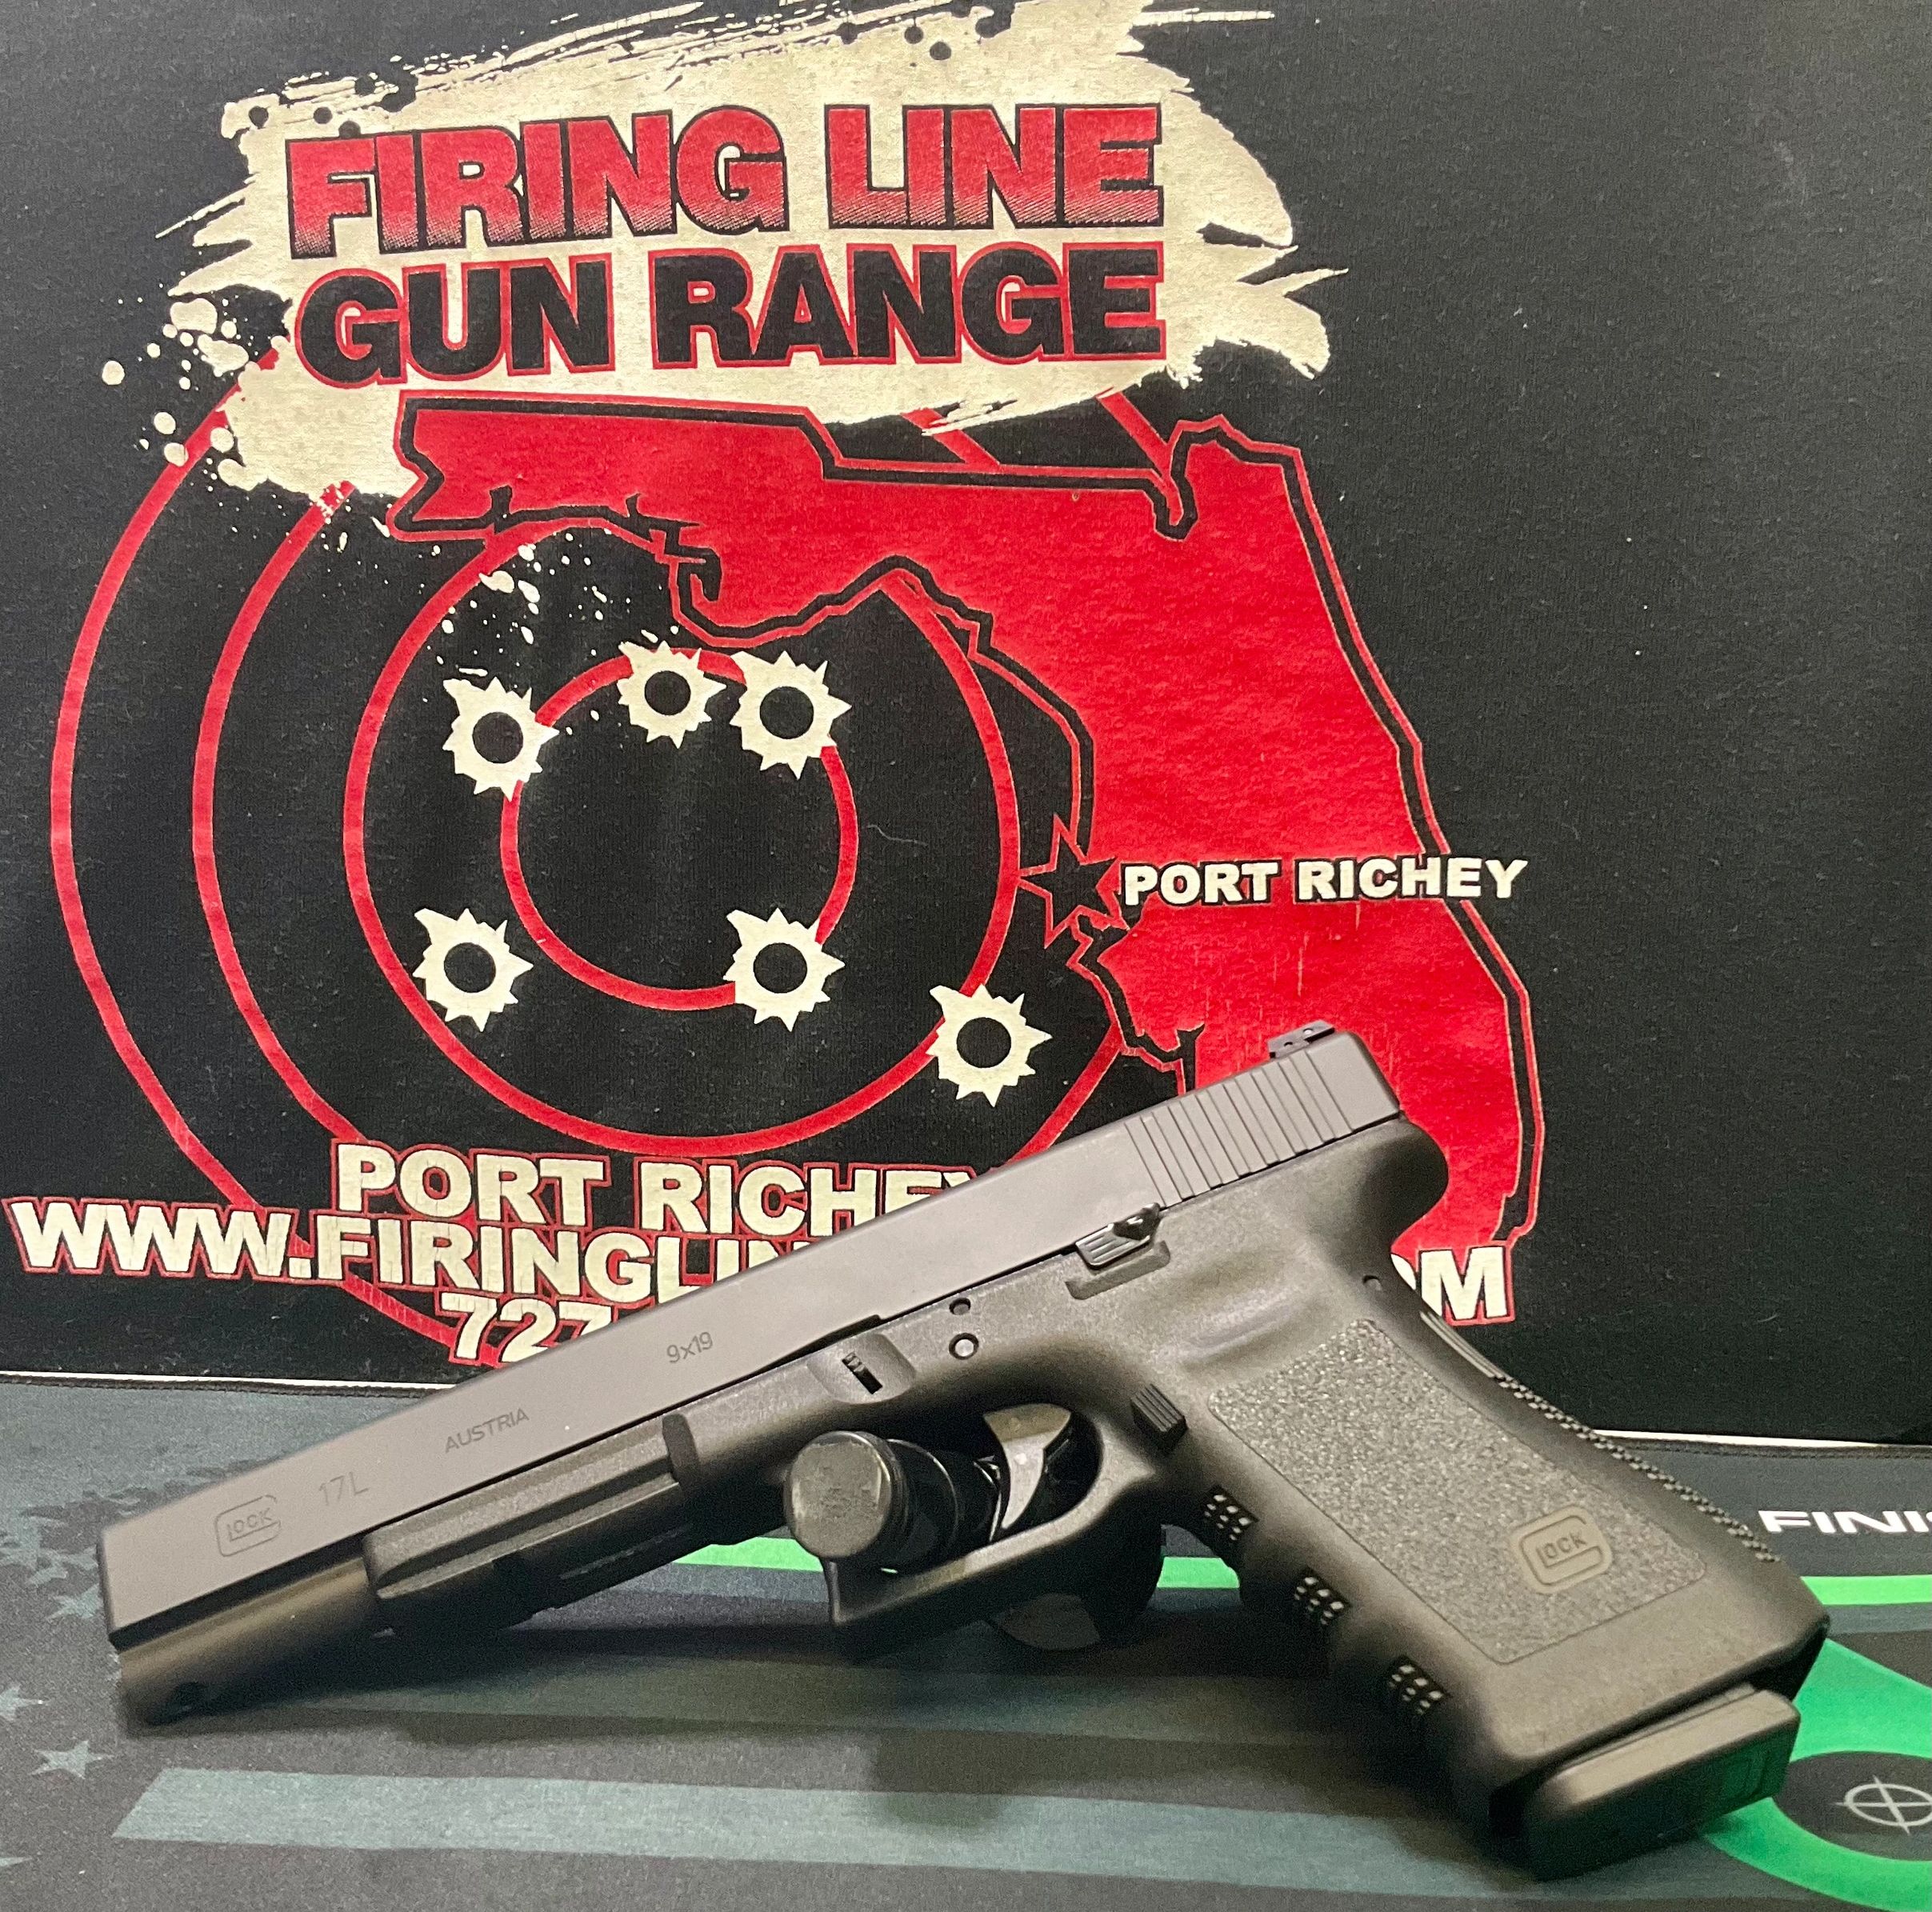 GLOCK G17L Rare! $651.99
Stop in or Call for Purchase 